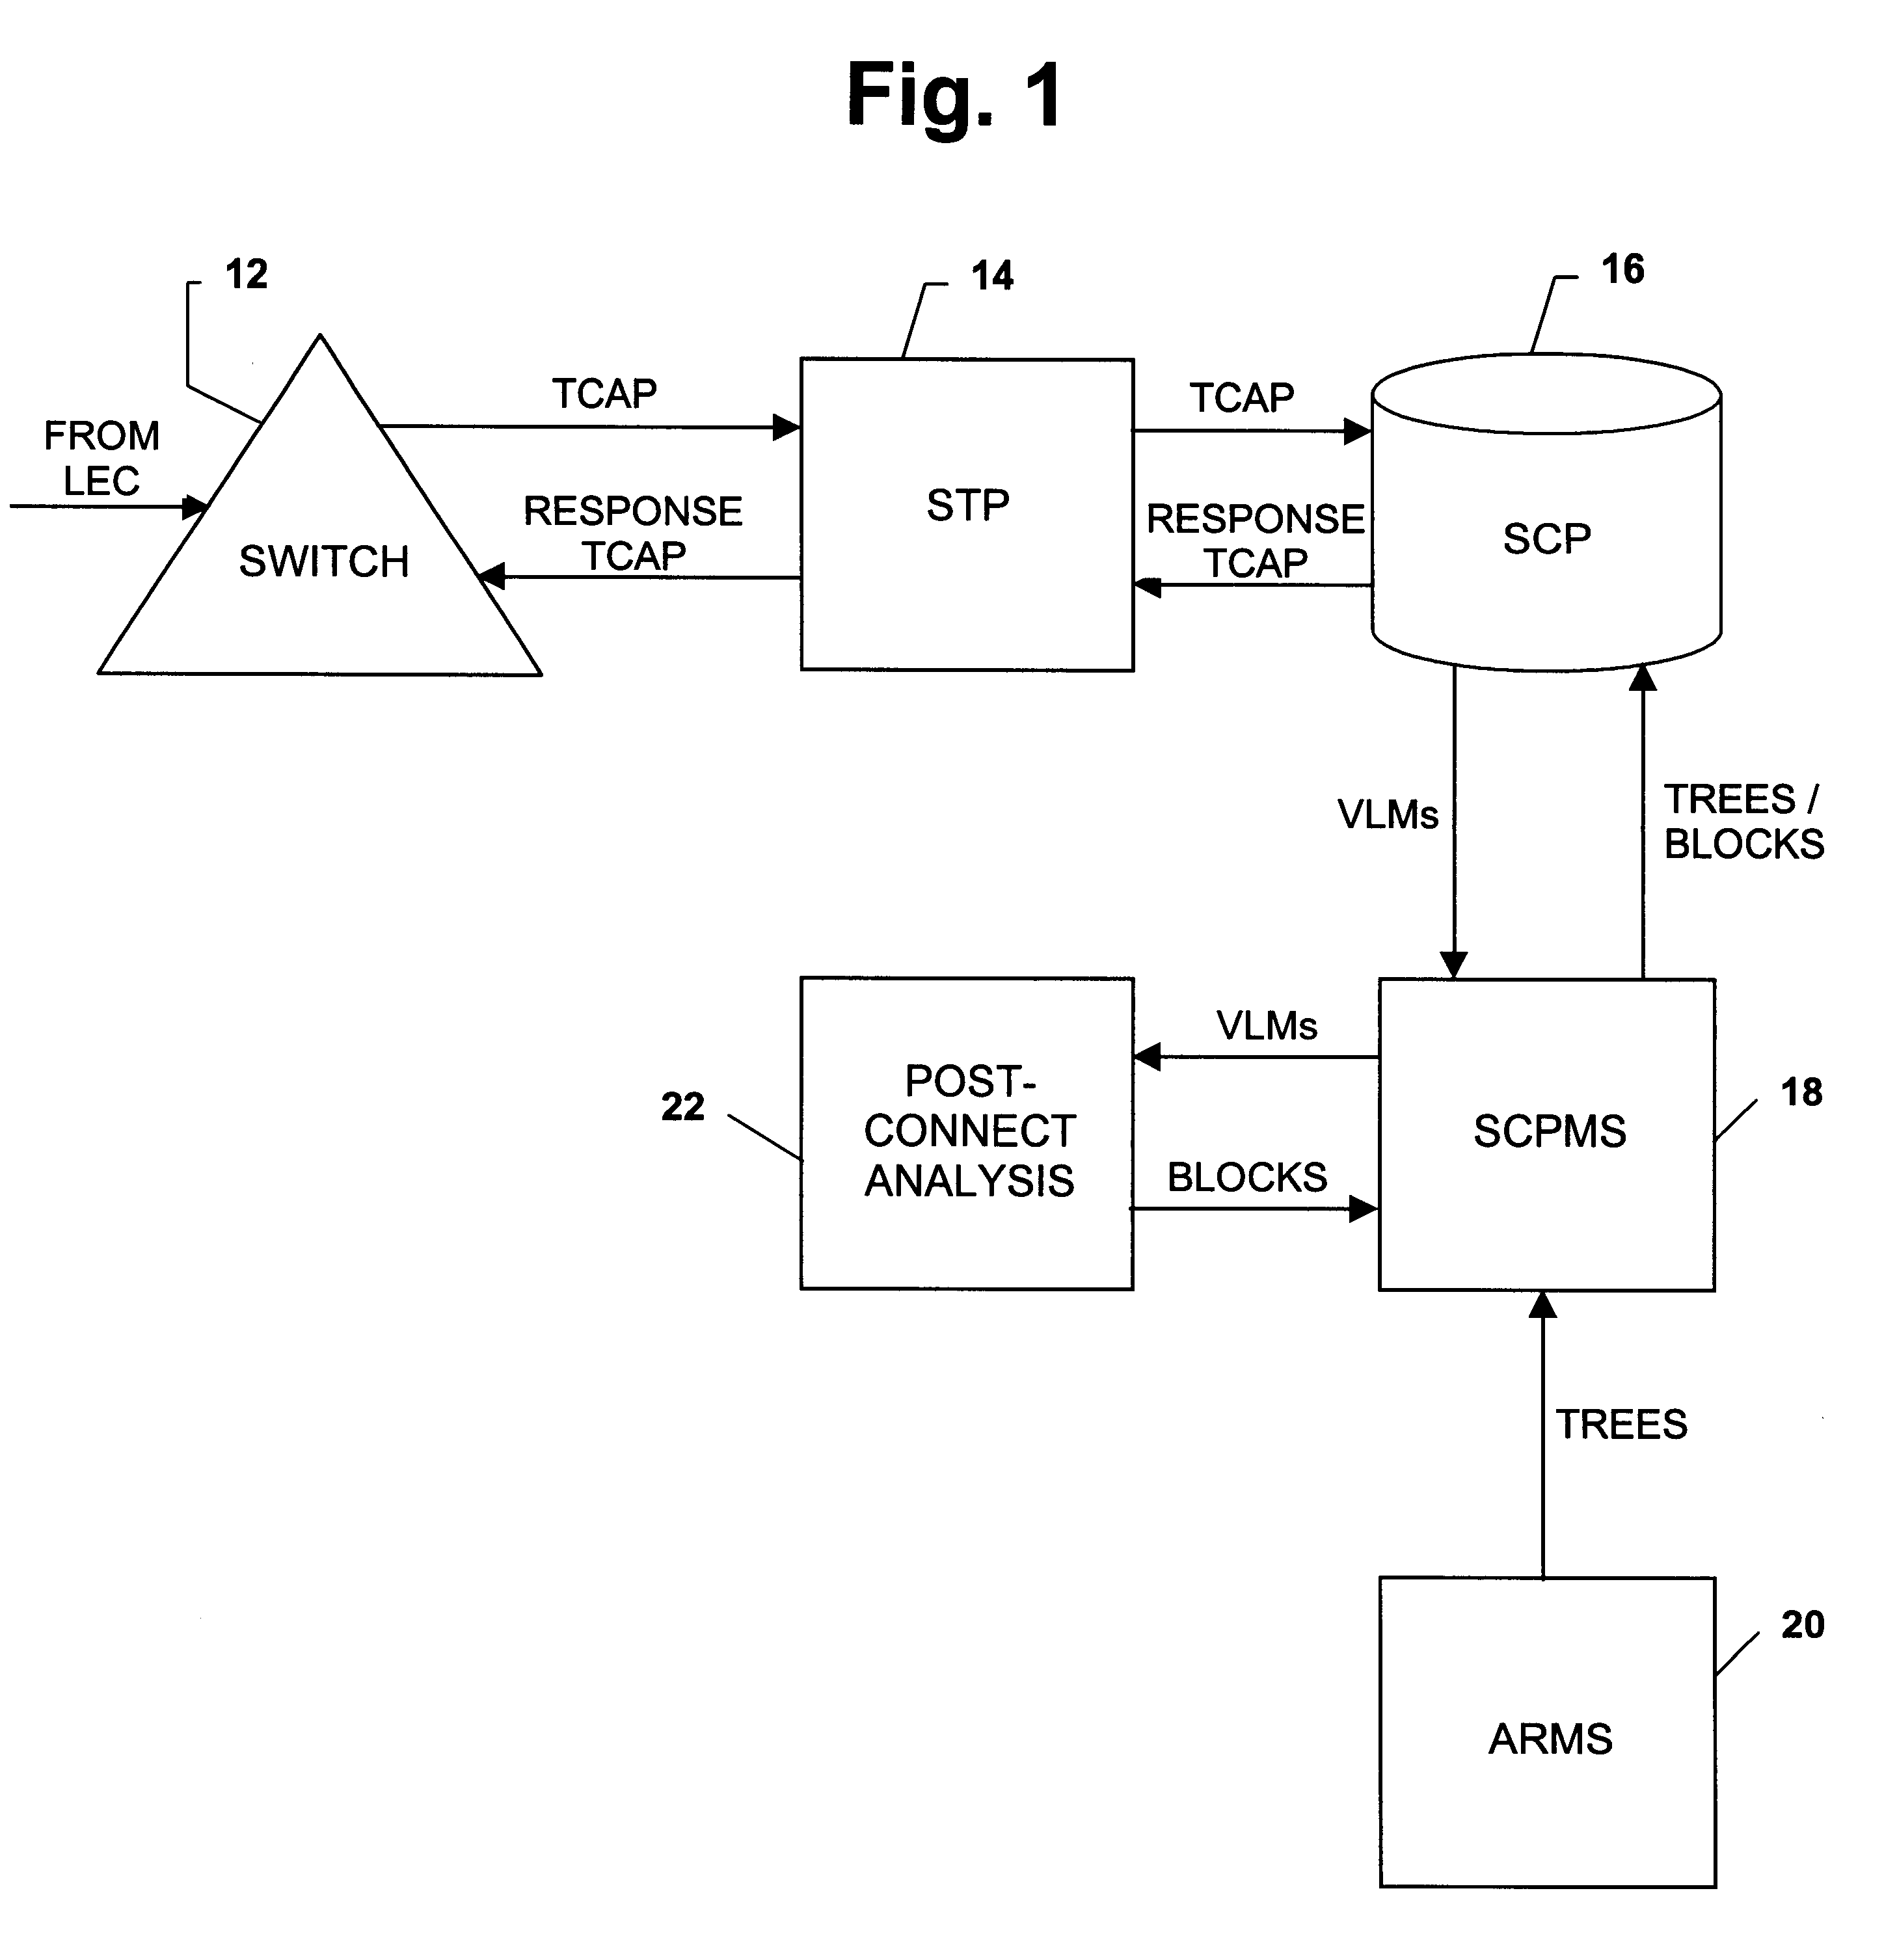 System for detection and prevention of telecommunications fraud prior to call connection